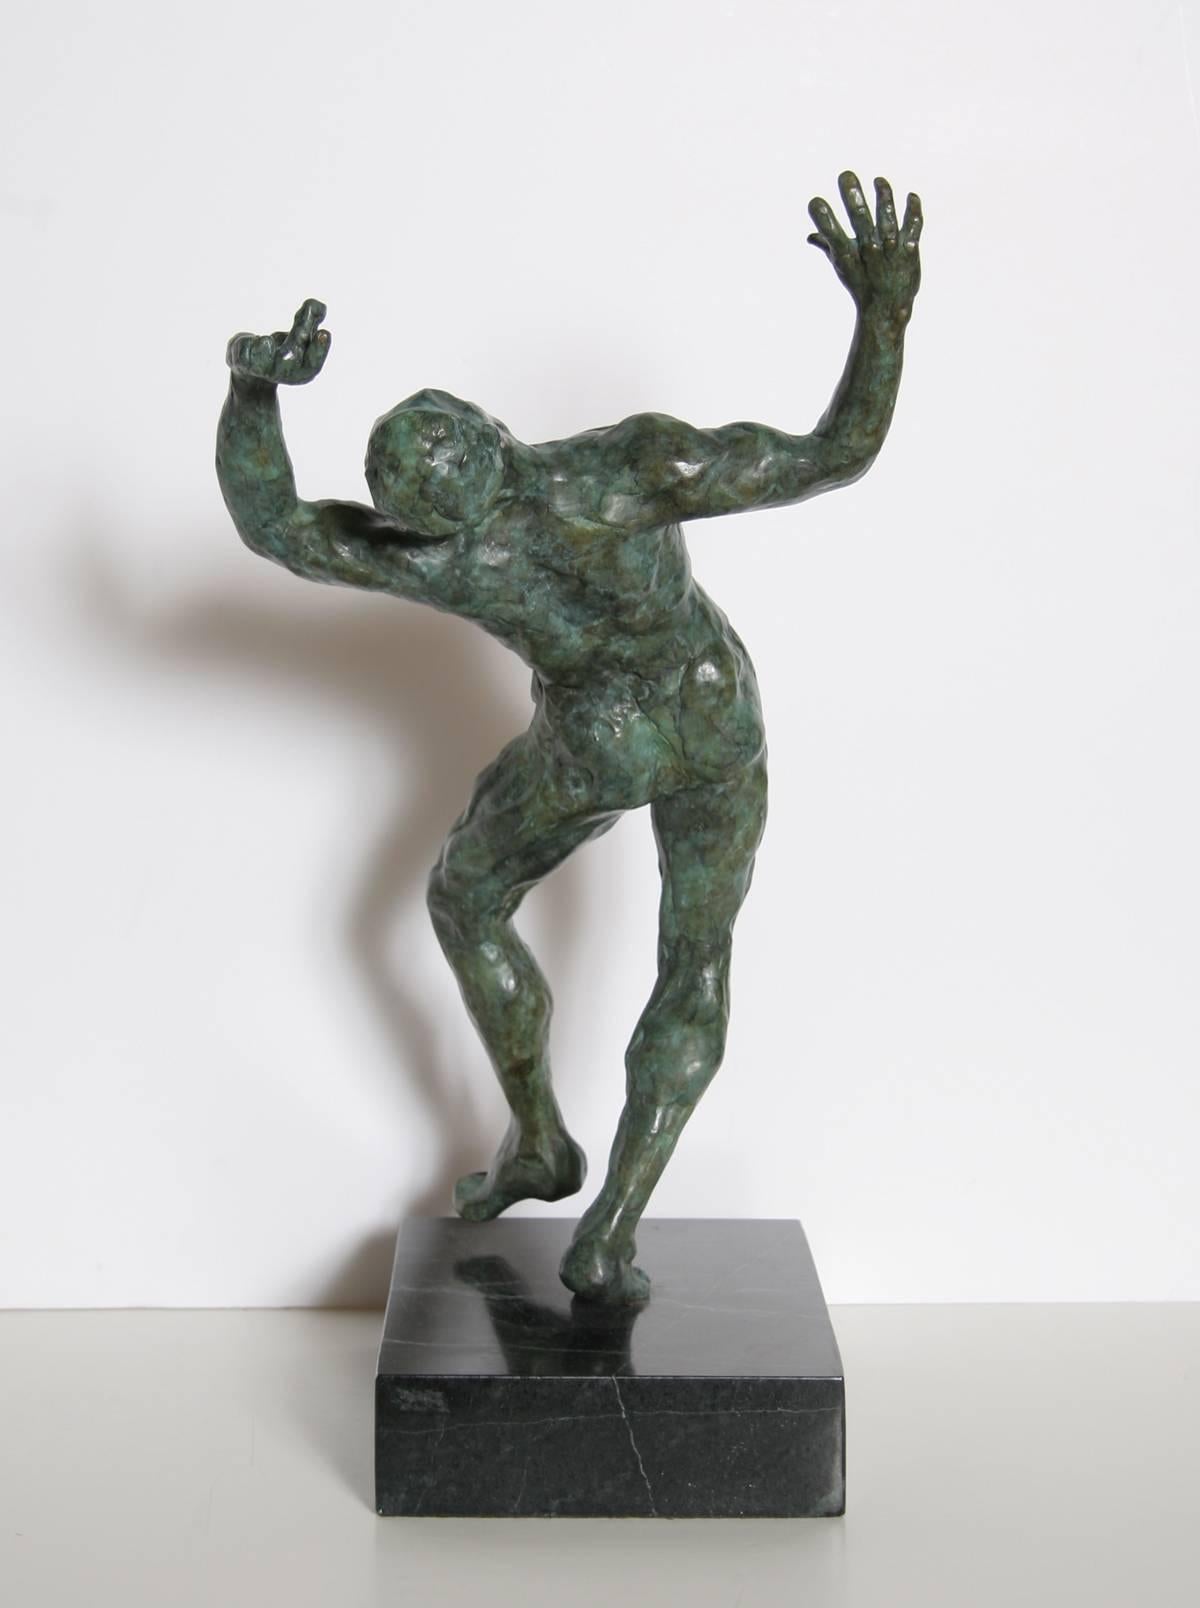 Artist: Anthony Quinn, American (1915 - 2001)
Title:	Spirit of Zorba
Year: 1984 
Medium:	Bronze Sculpture, signature, date and edition inscribed
Edition: 49, AP
Size:	16.5 x 9.5 x 8.5 inches
Including Base: 18.5 inches